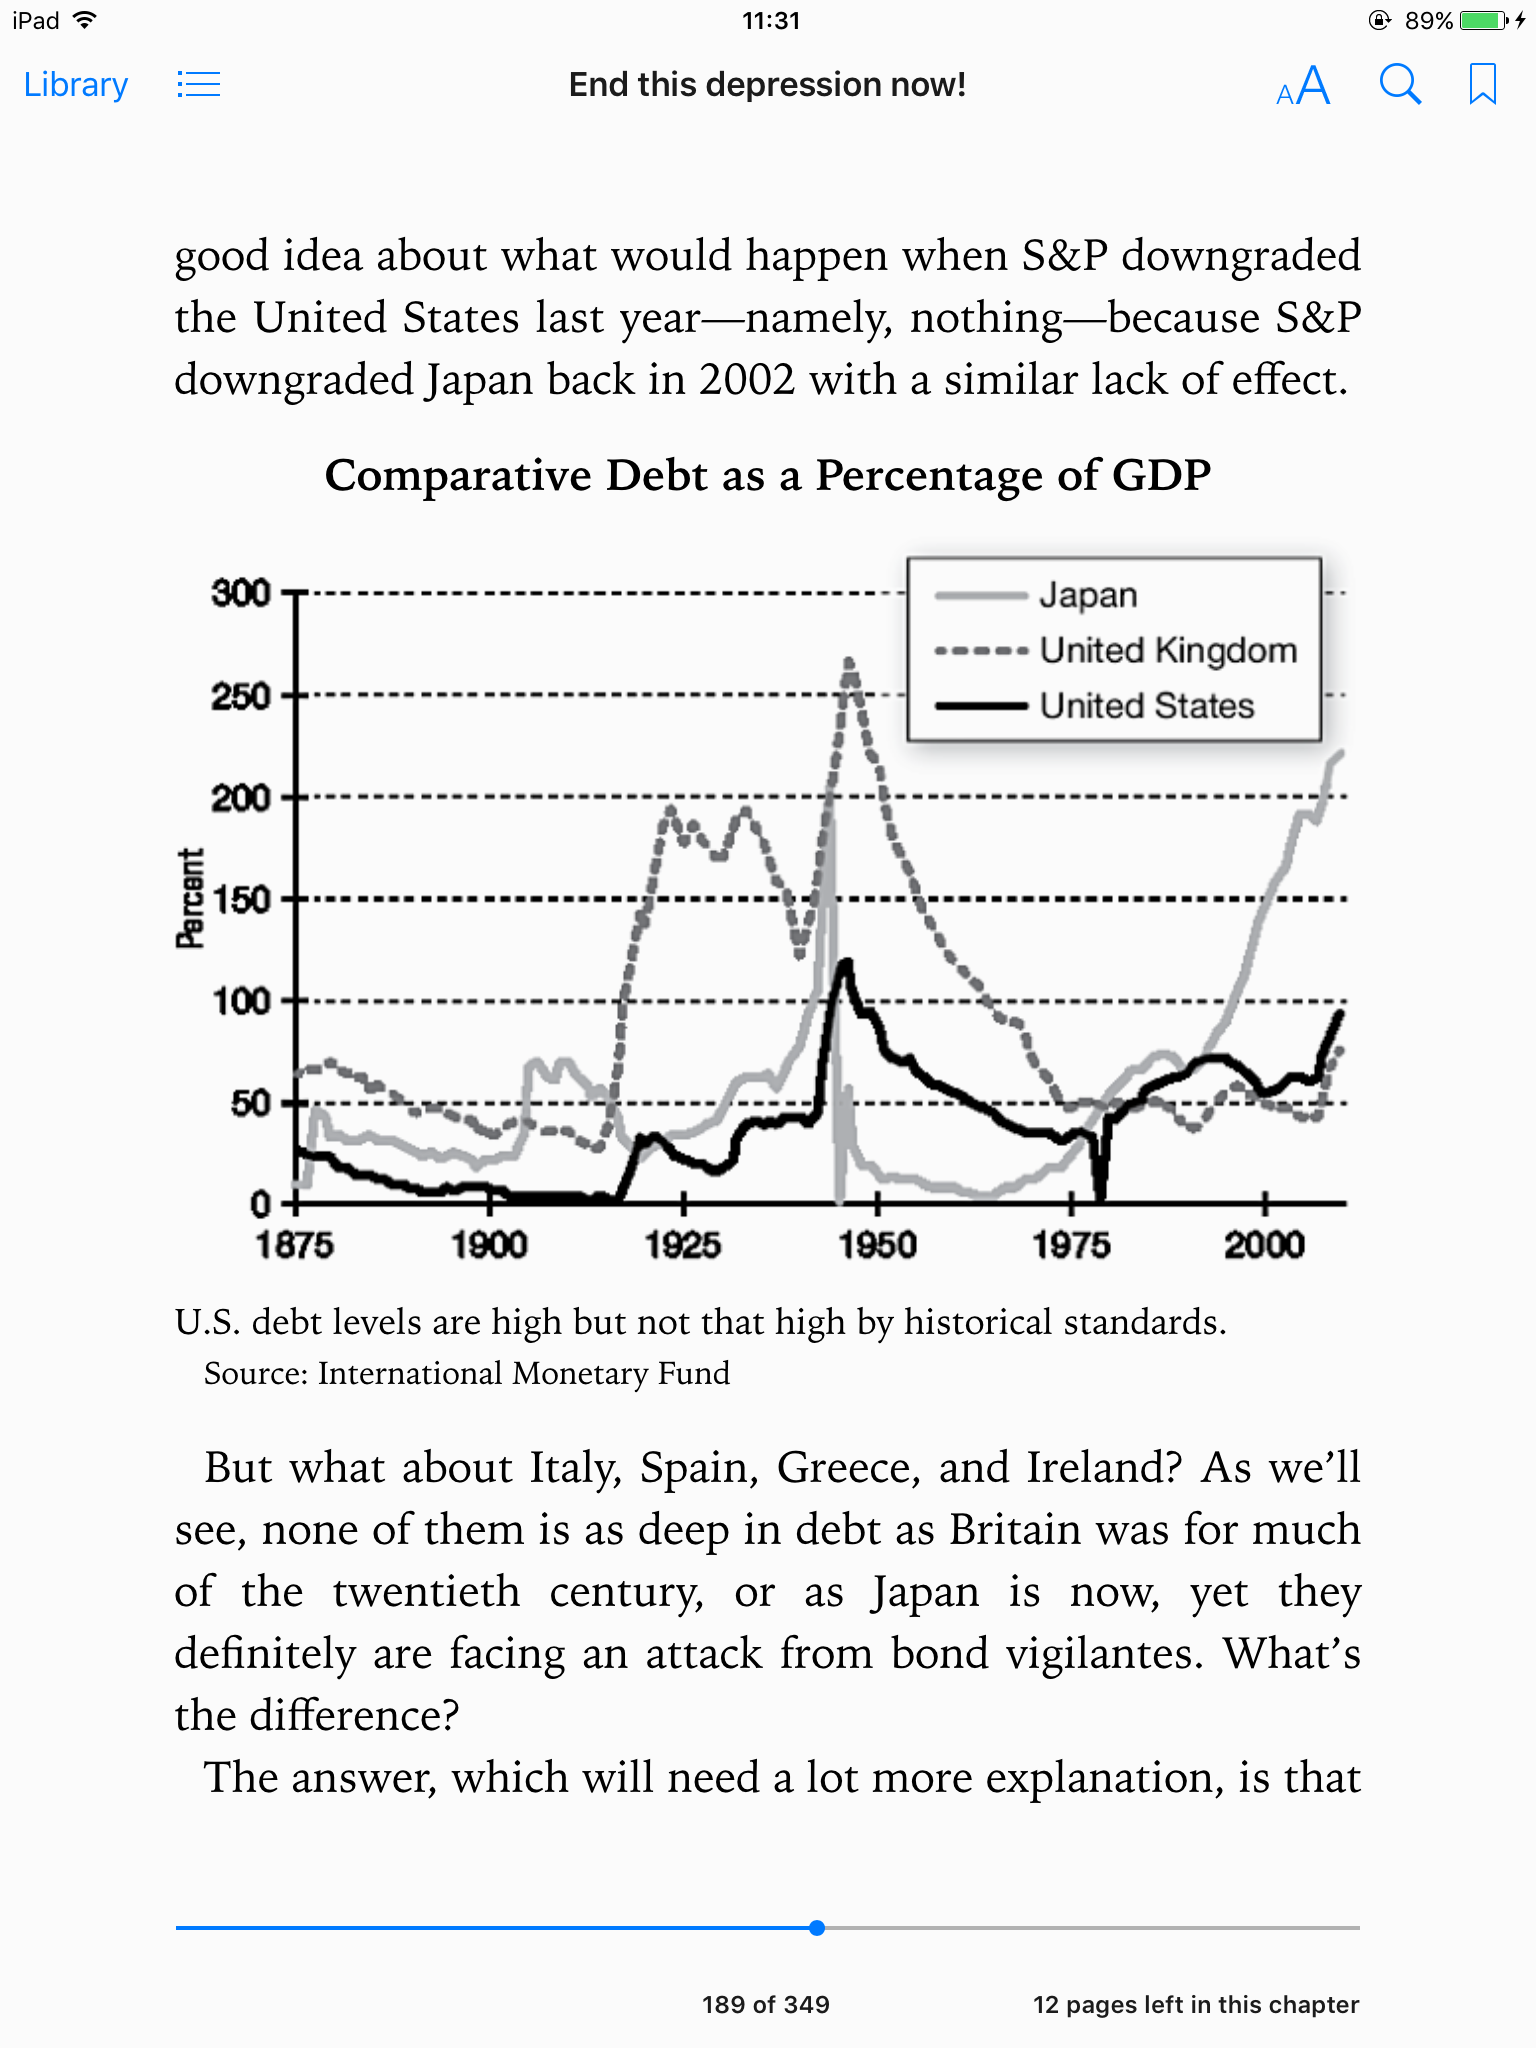 An extract of an ebook with a statistical figure in the middle of the page